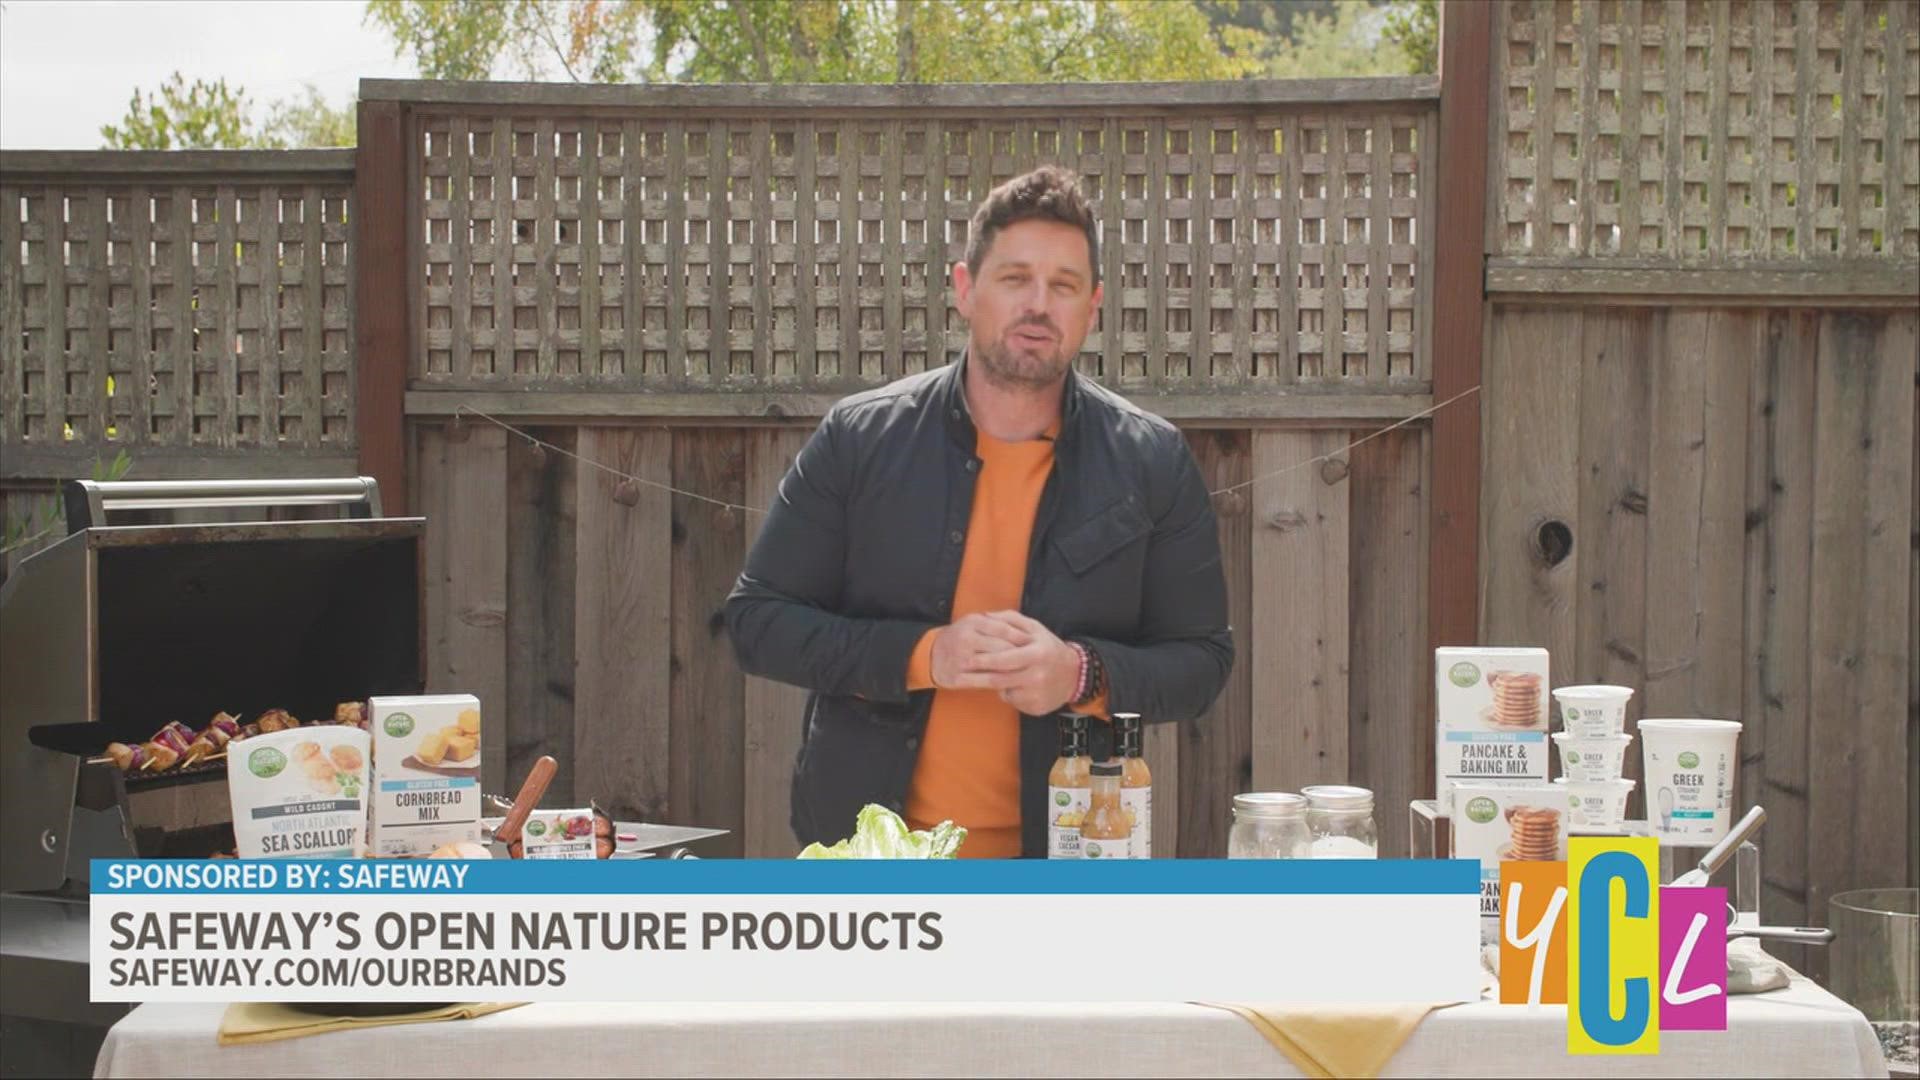 Former Top Chef contestant Ryan Scott shares delicious clean eats ideas for the campfire or a backyard BBQ! This segment sponsored by Safeway.